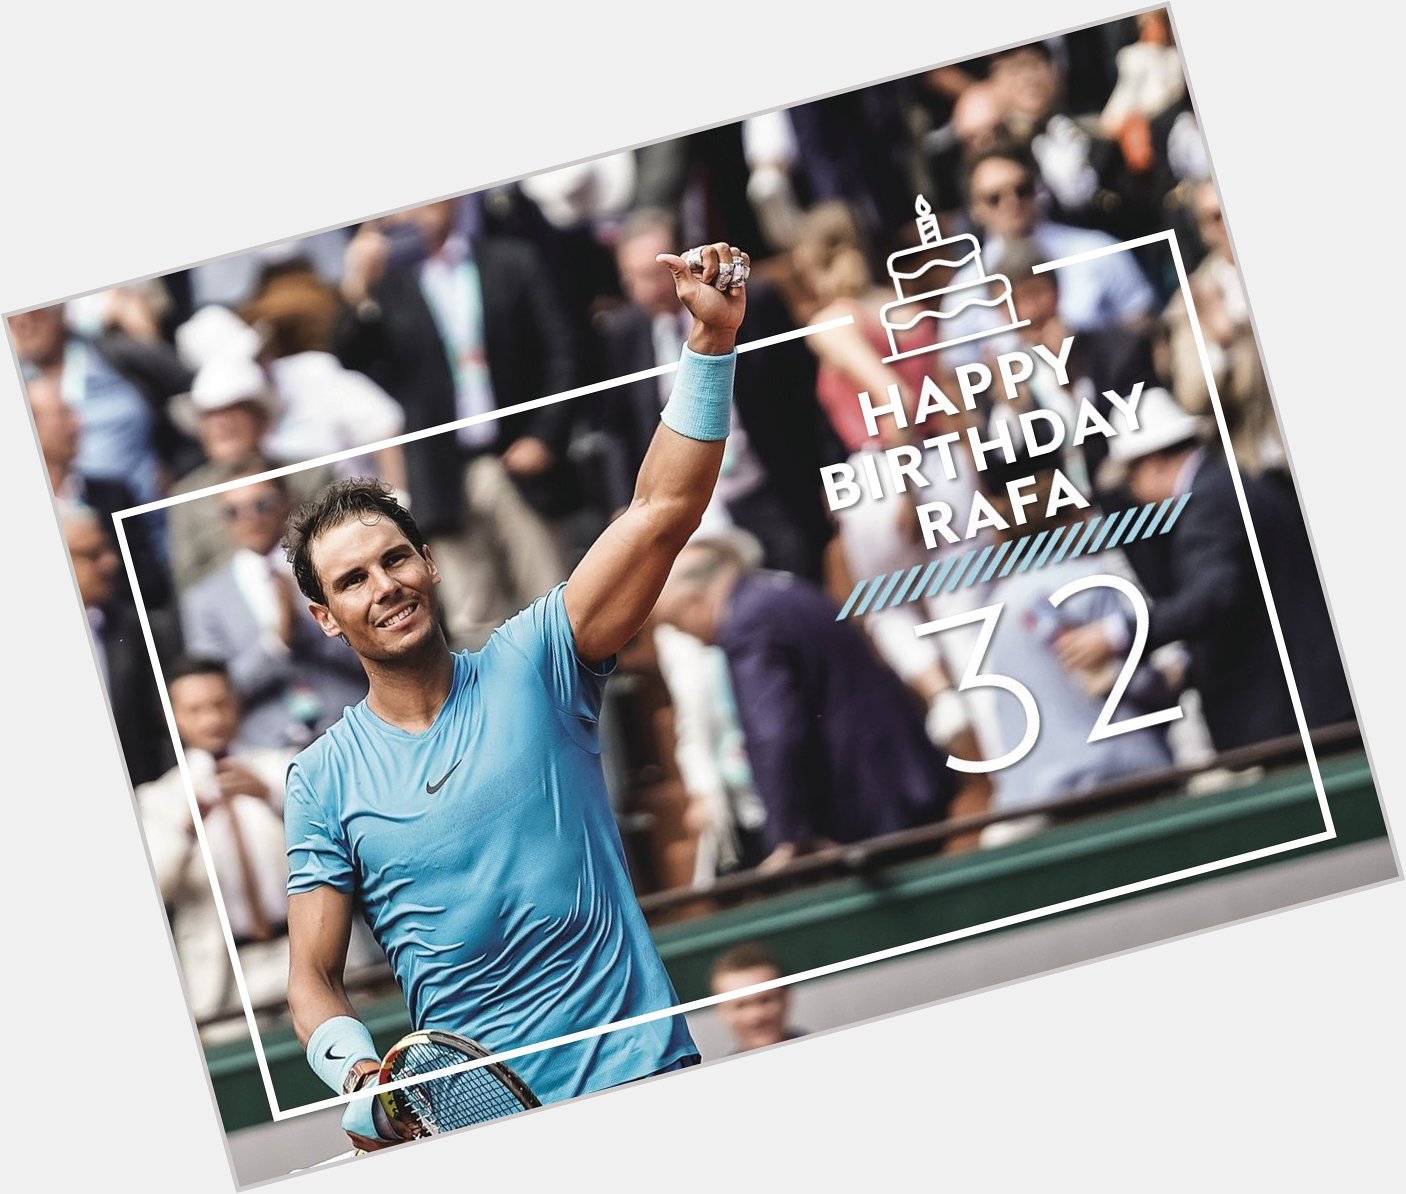 I think,that Rafael is the best!!!He is the king of tennis   Happy birthday,Rafael Nadal     